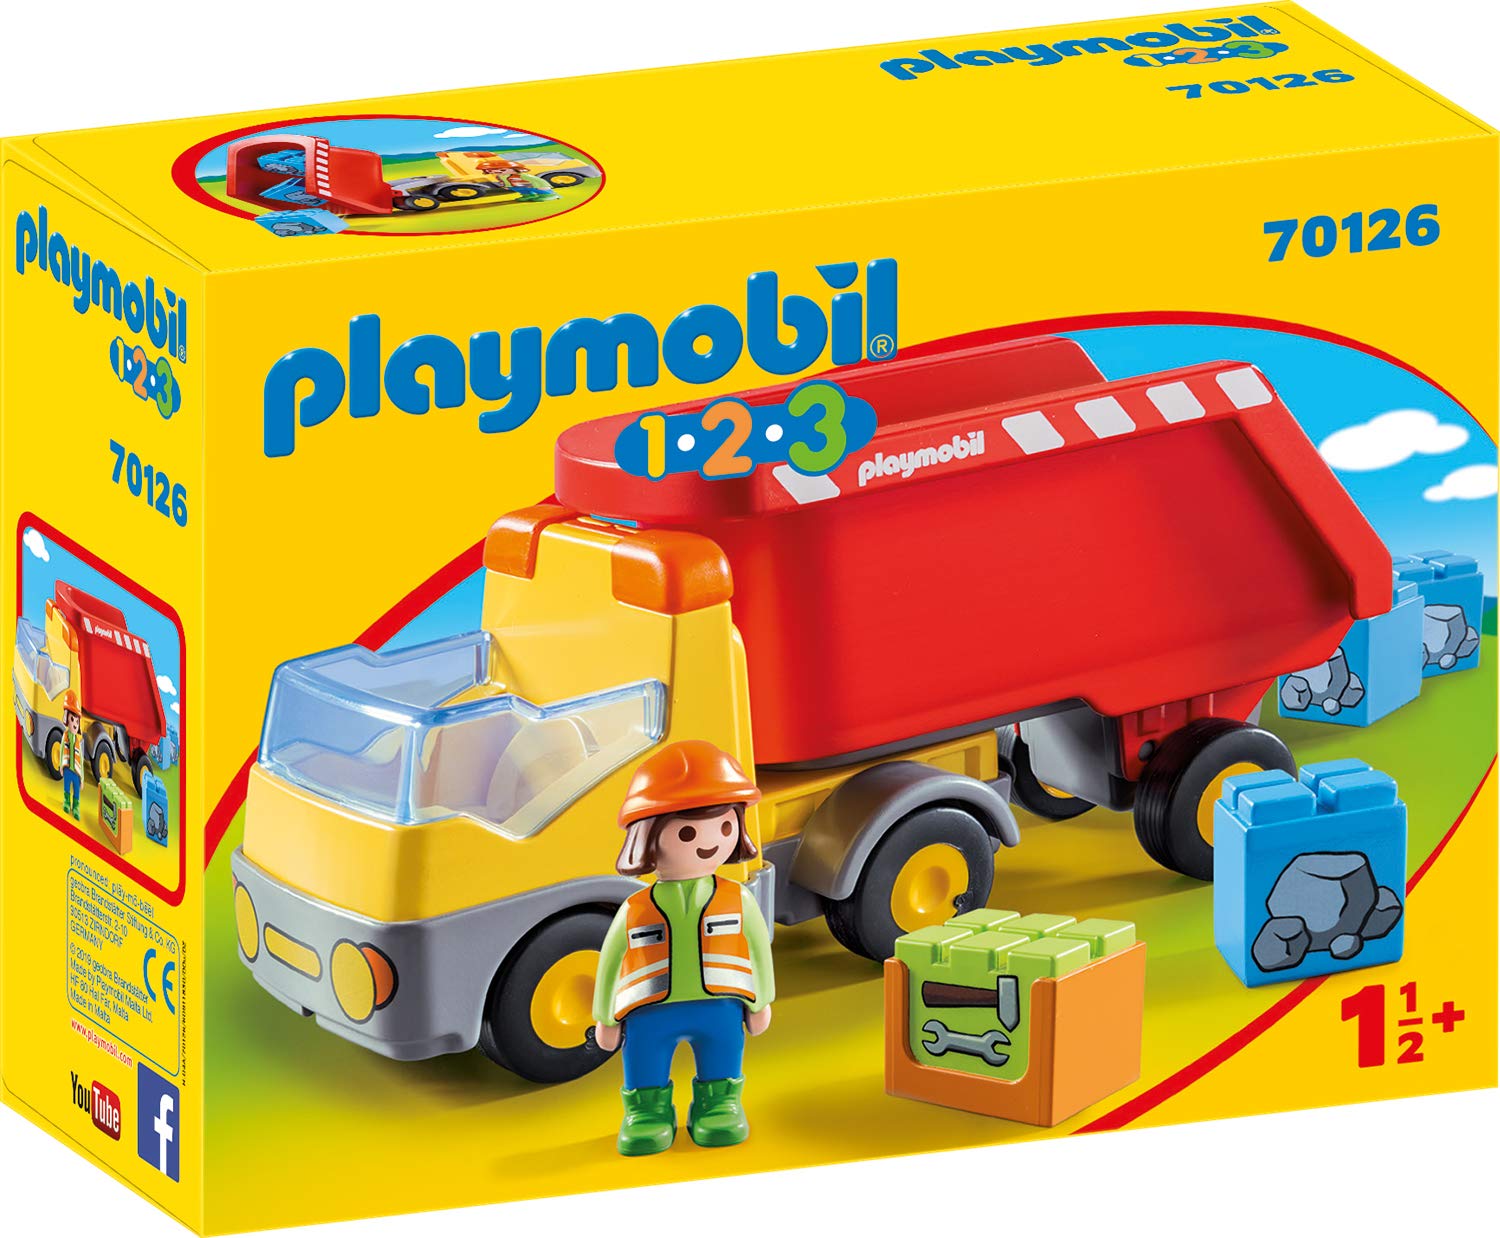 Playmobil 70126 1.2.3. Toy Sand Toy, Multi-Coloured, One Size